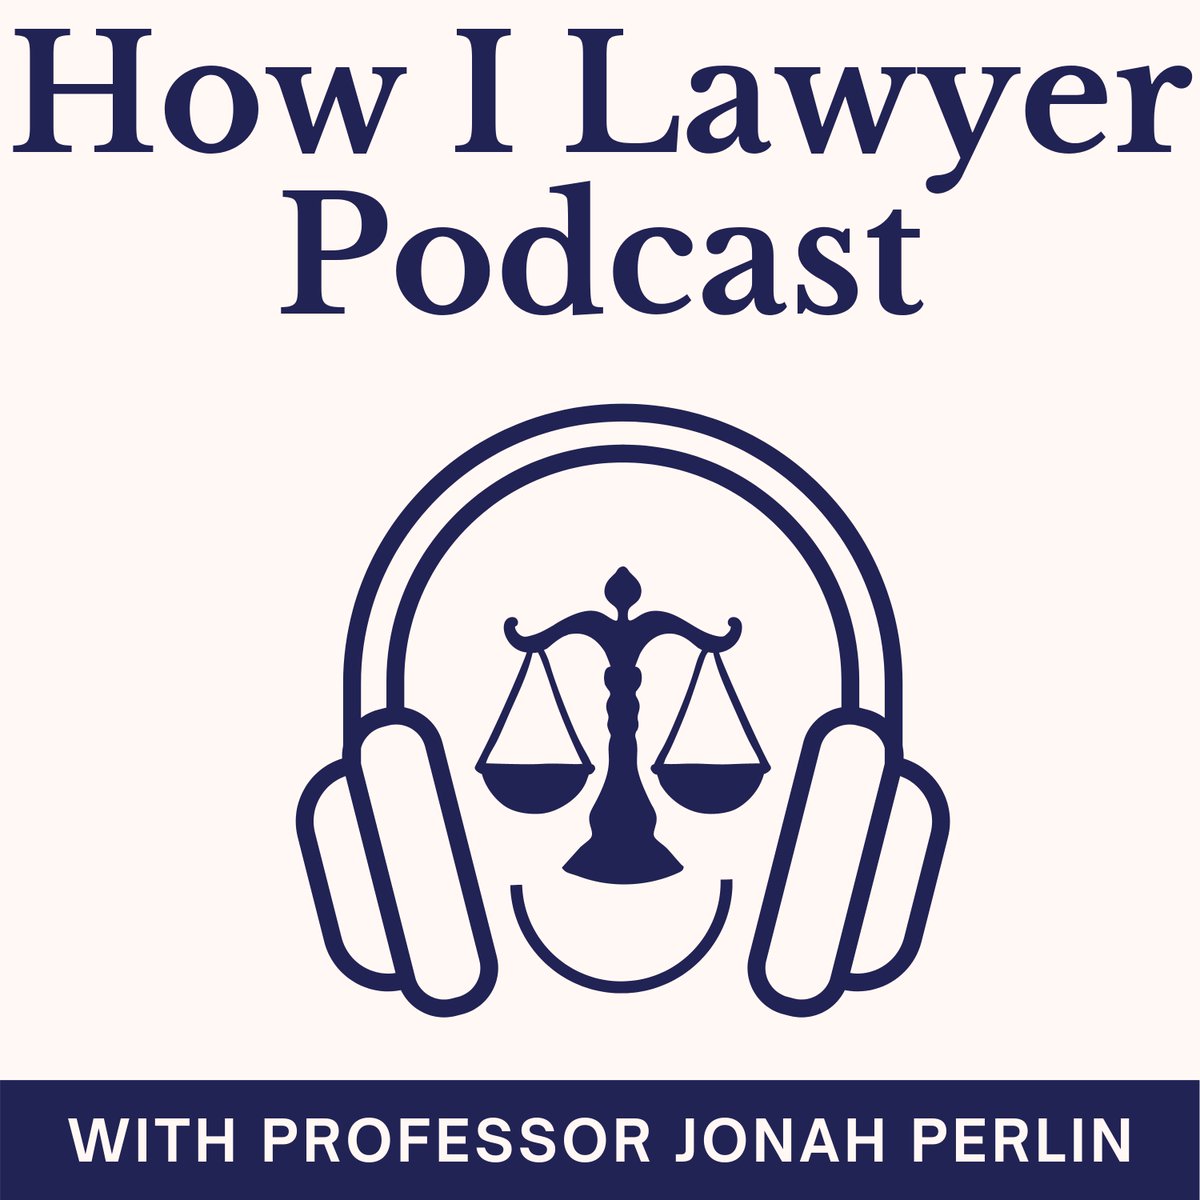 Personal NewsI am starting a podcast called “How I Lawyer.” On it I will interview attorneys about what they do, why they do it, and how they do it well. Interested?  RT and subscribe at  http://howilawyer.com  DM me with people to interviewWant to know more? 